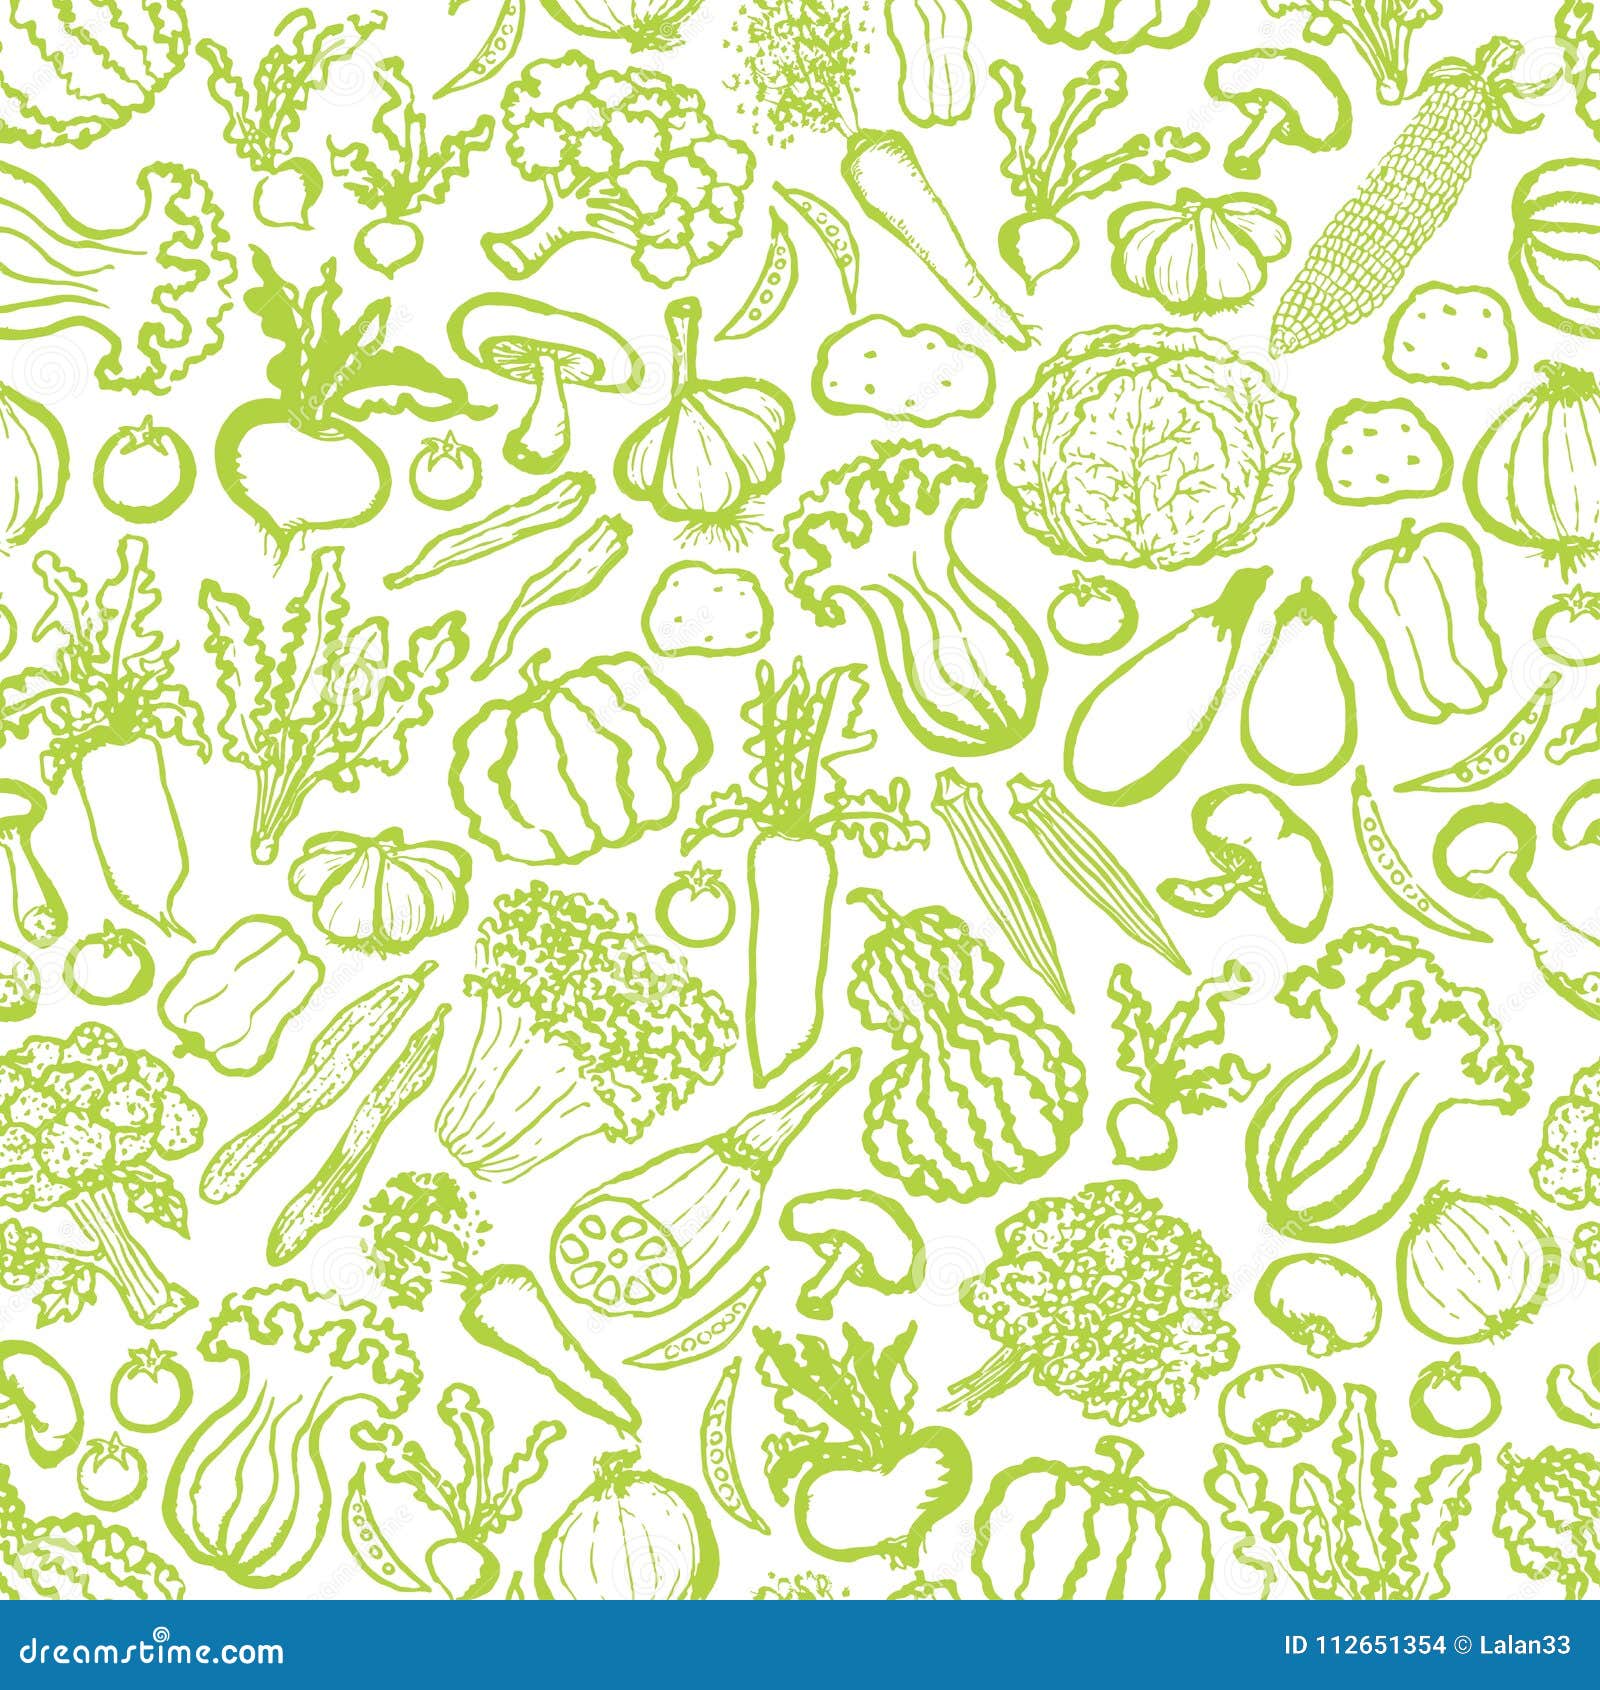 Background with Hand Drawn Green Vegetables. Stock Vector ...